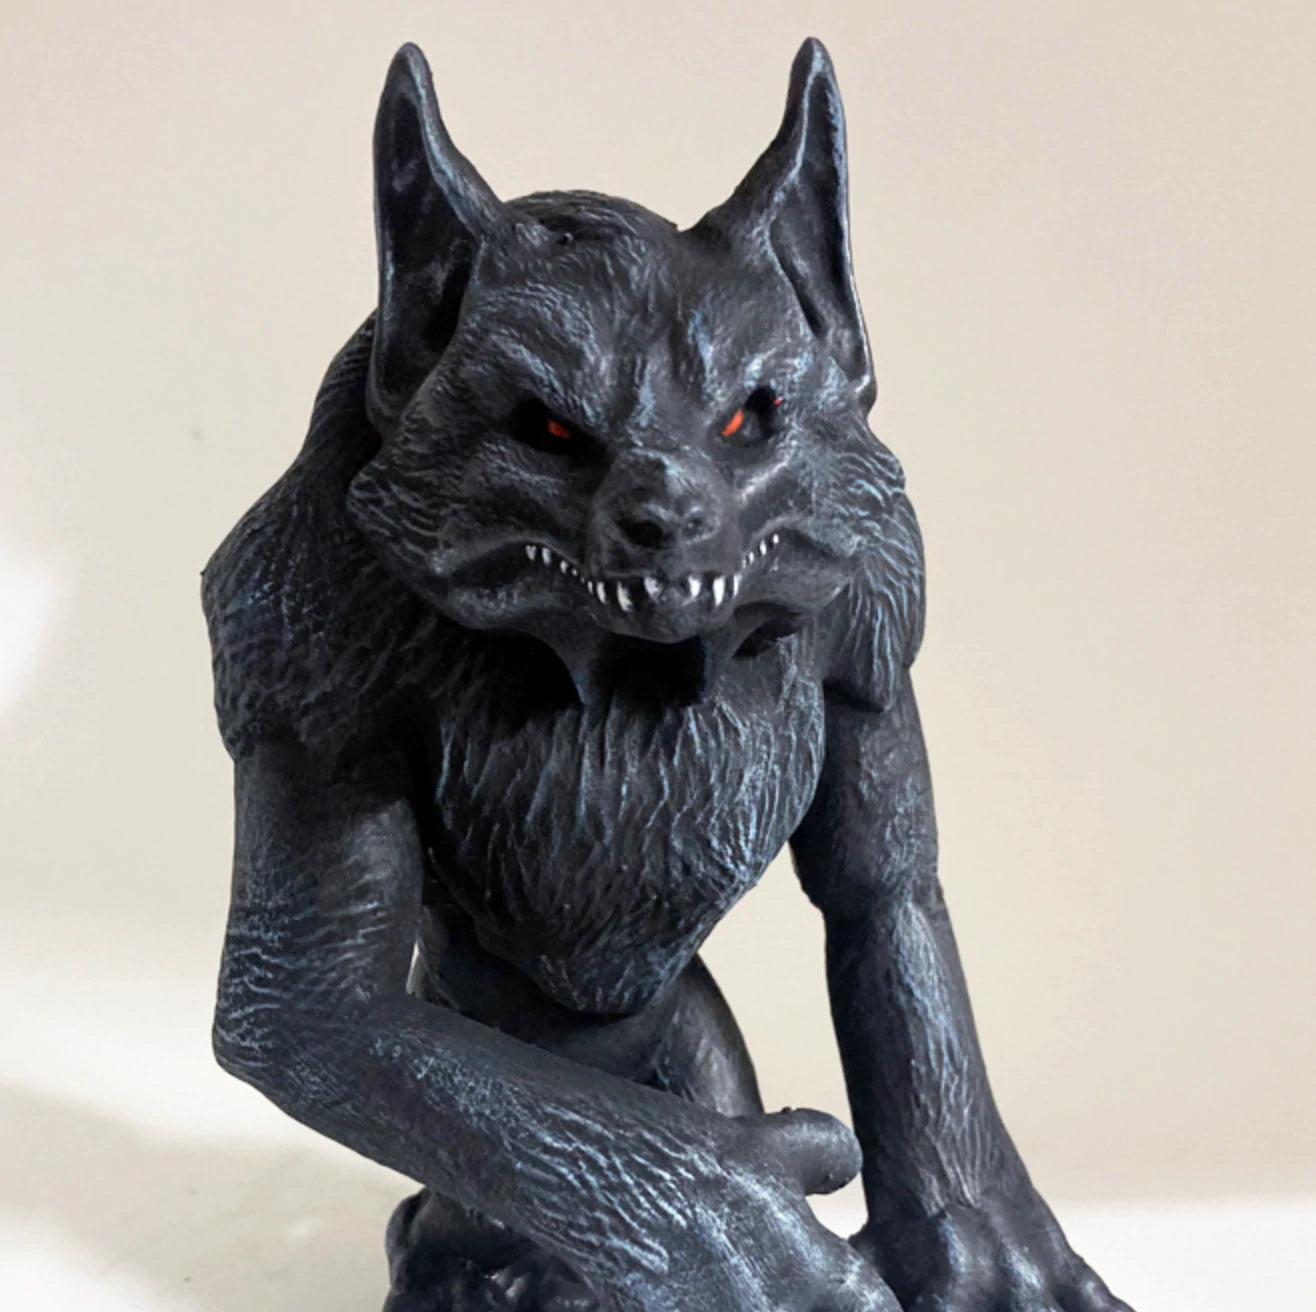 Fey Folk The Barghest 6-inch resin figure by Weston Brownlee Available Now